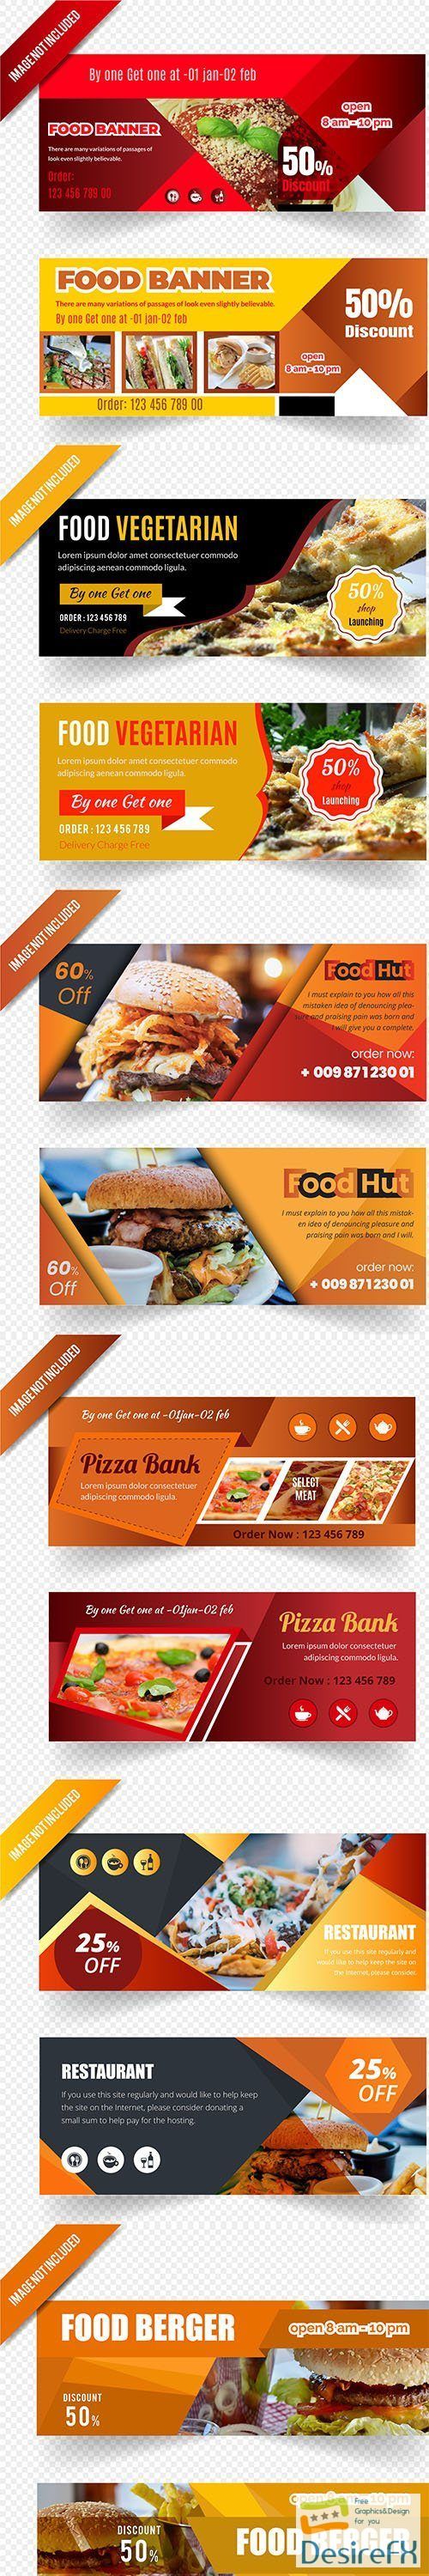 Banners for Cafes and Restaurants - Vector Clipart